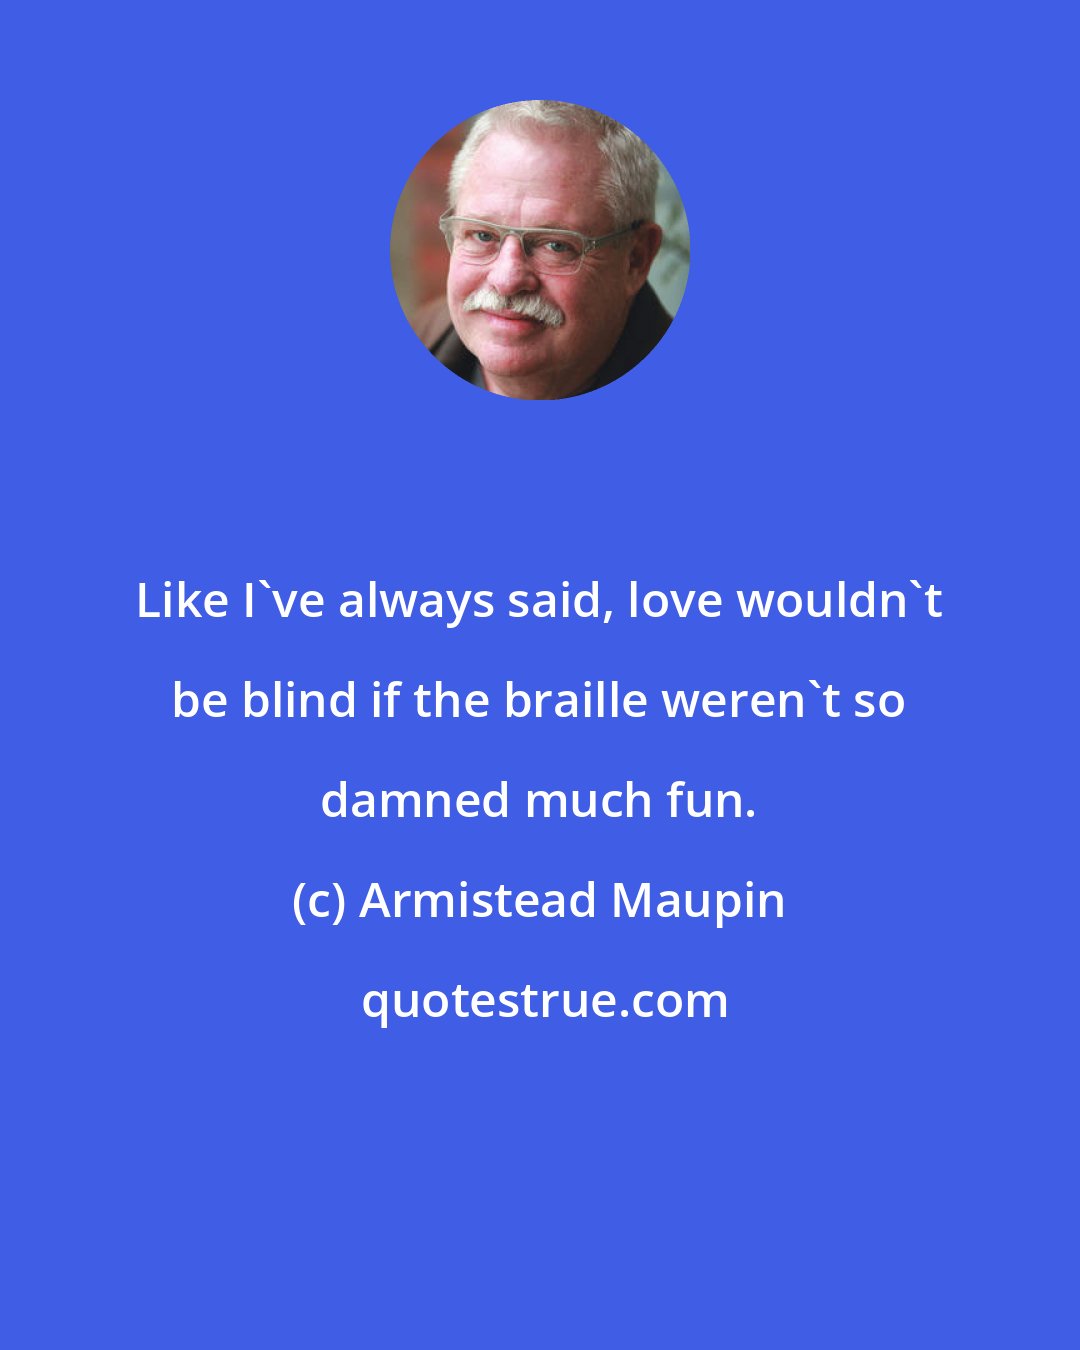 Armistead Maupin: Like I've always said, love wouldn't be blind if the braille weren't so damned much fun.